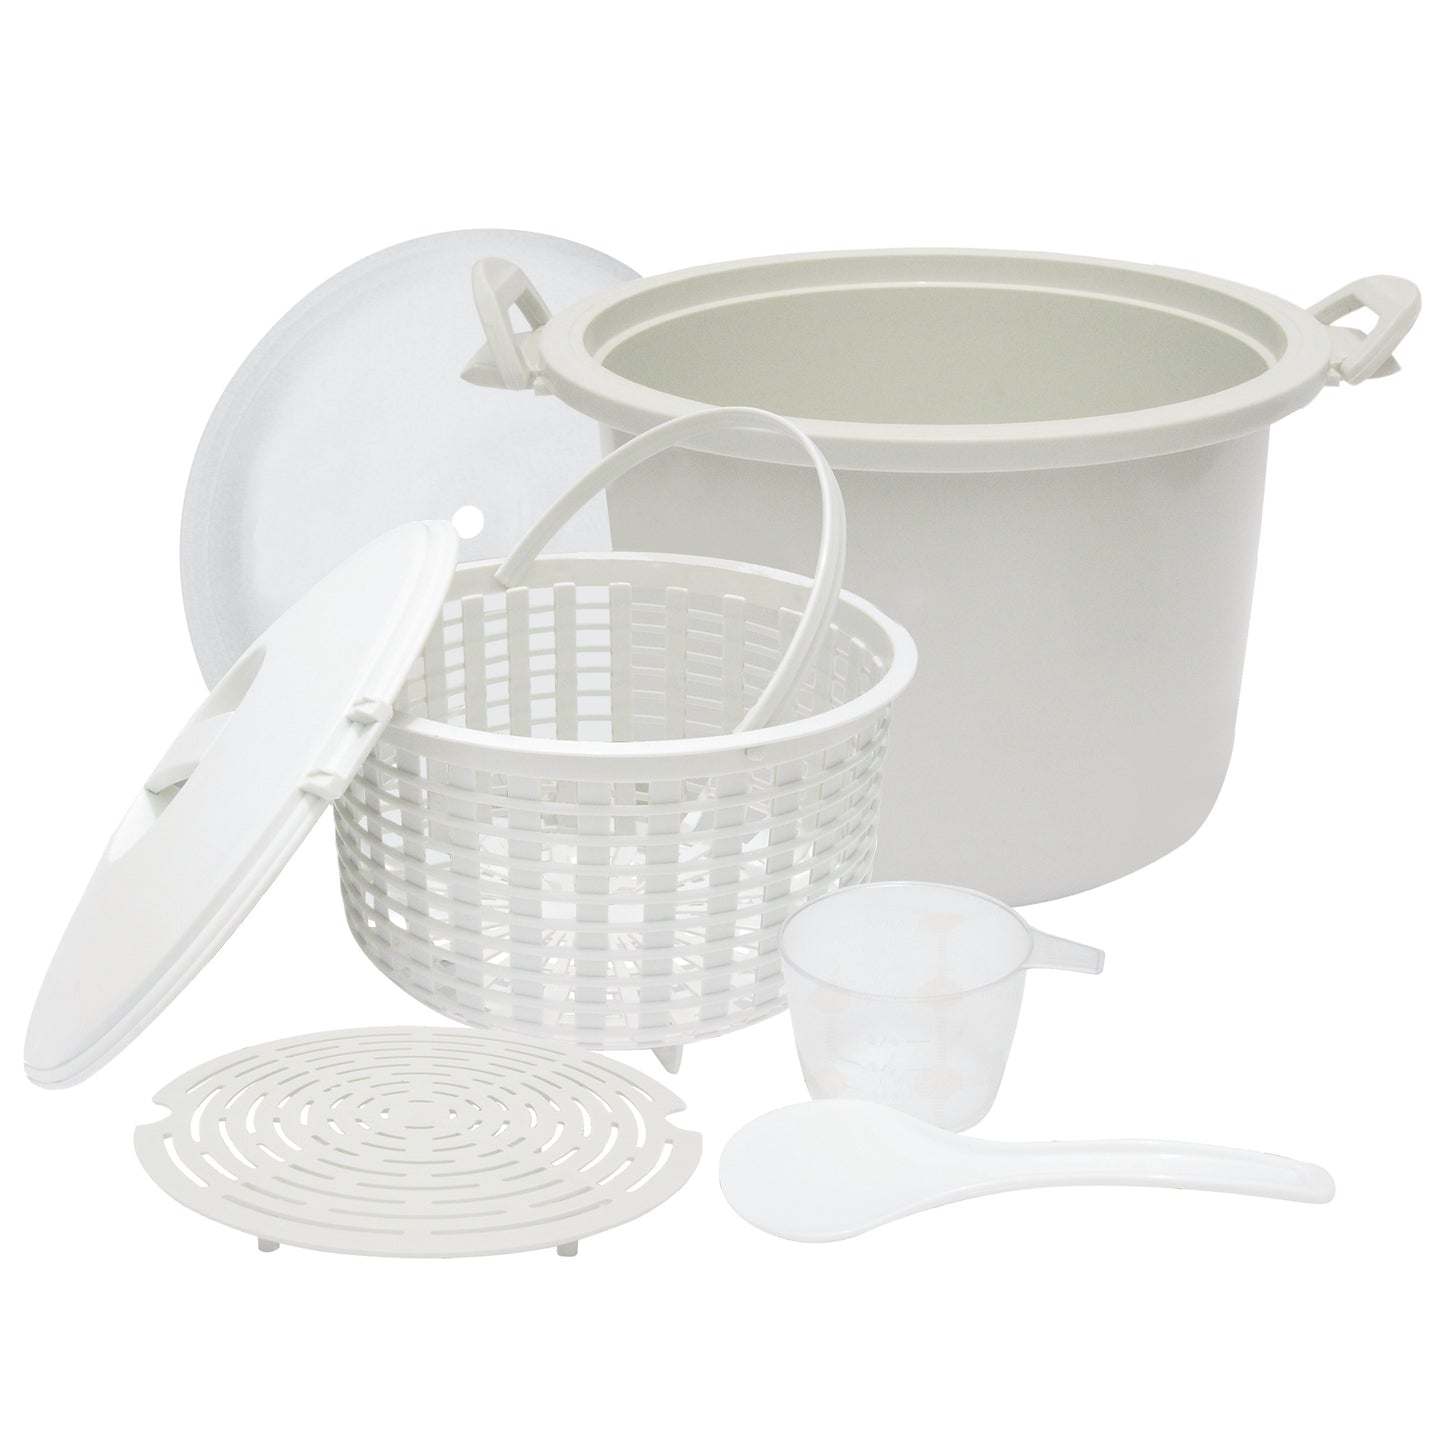  Microwave Cookware Steamer- 3 Piece Microwave Cooker w